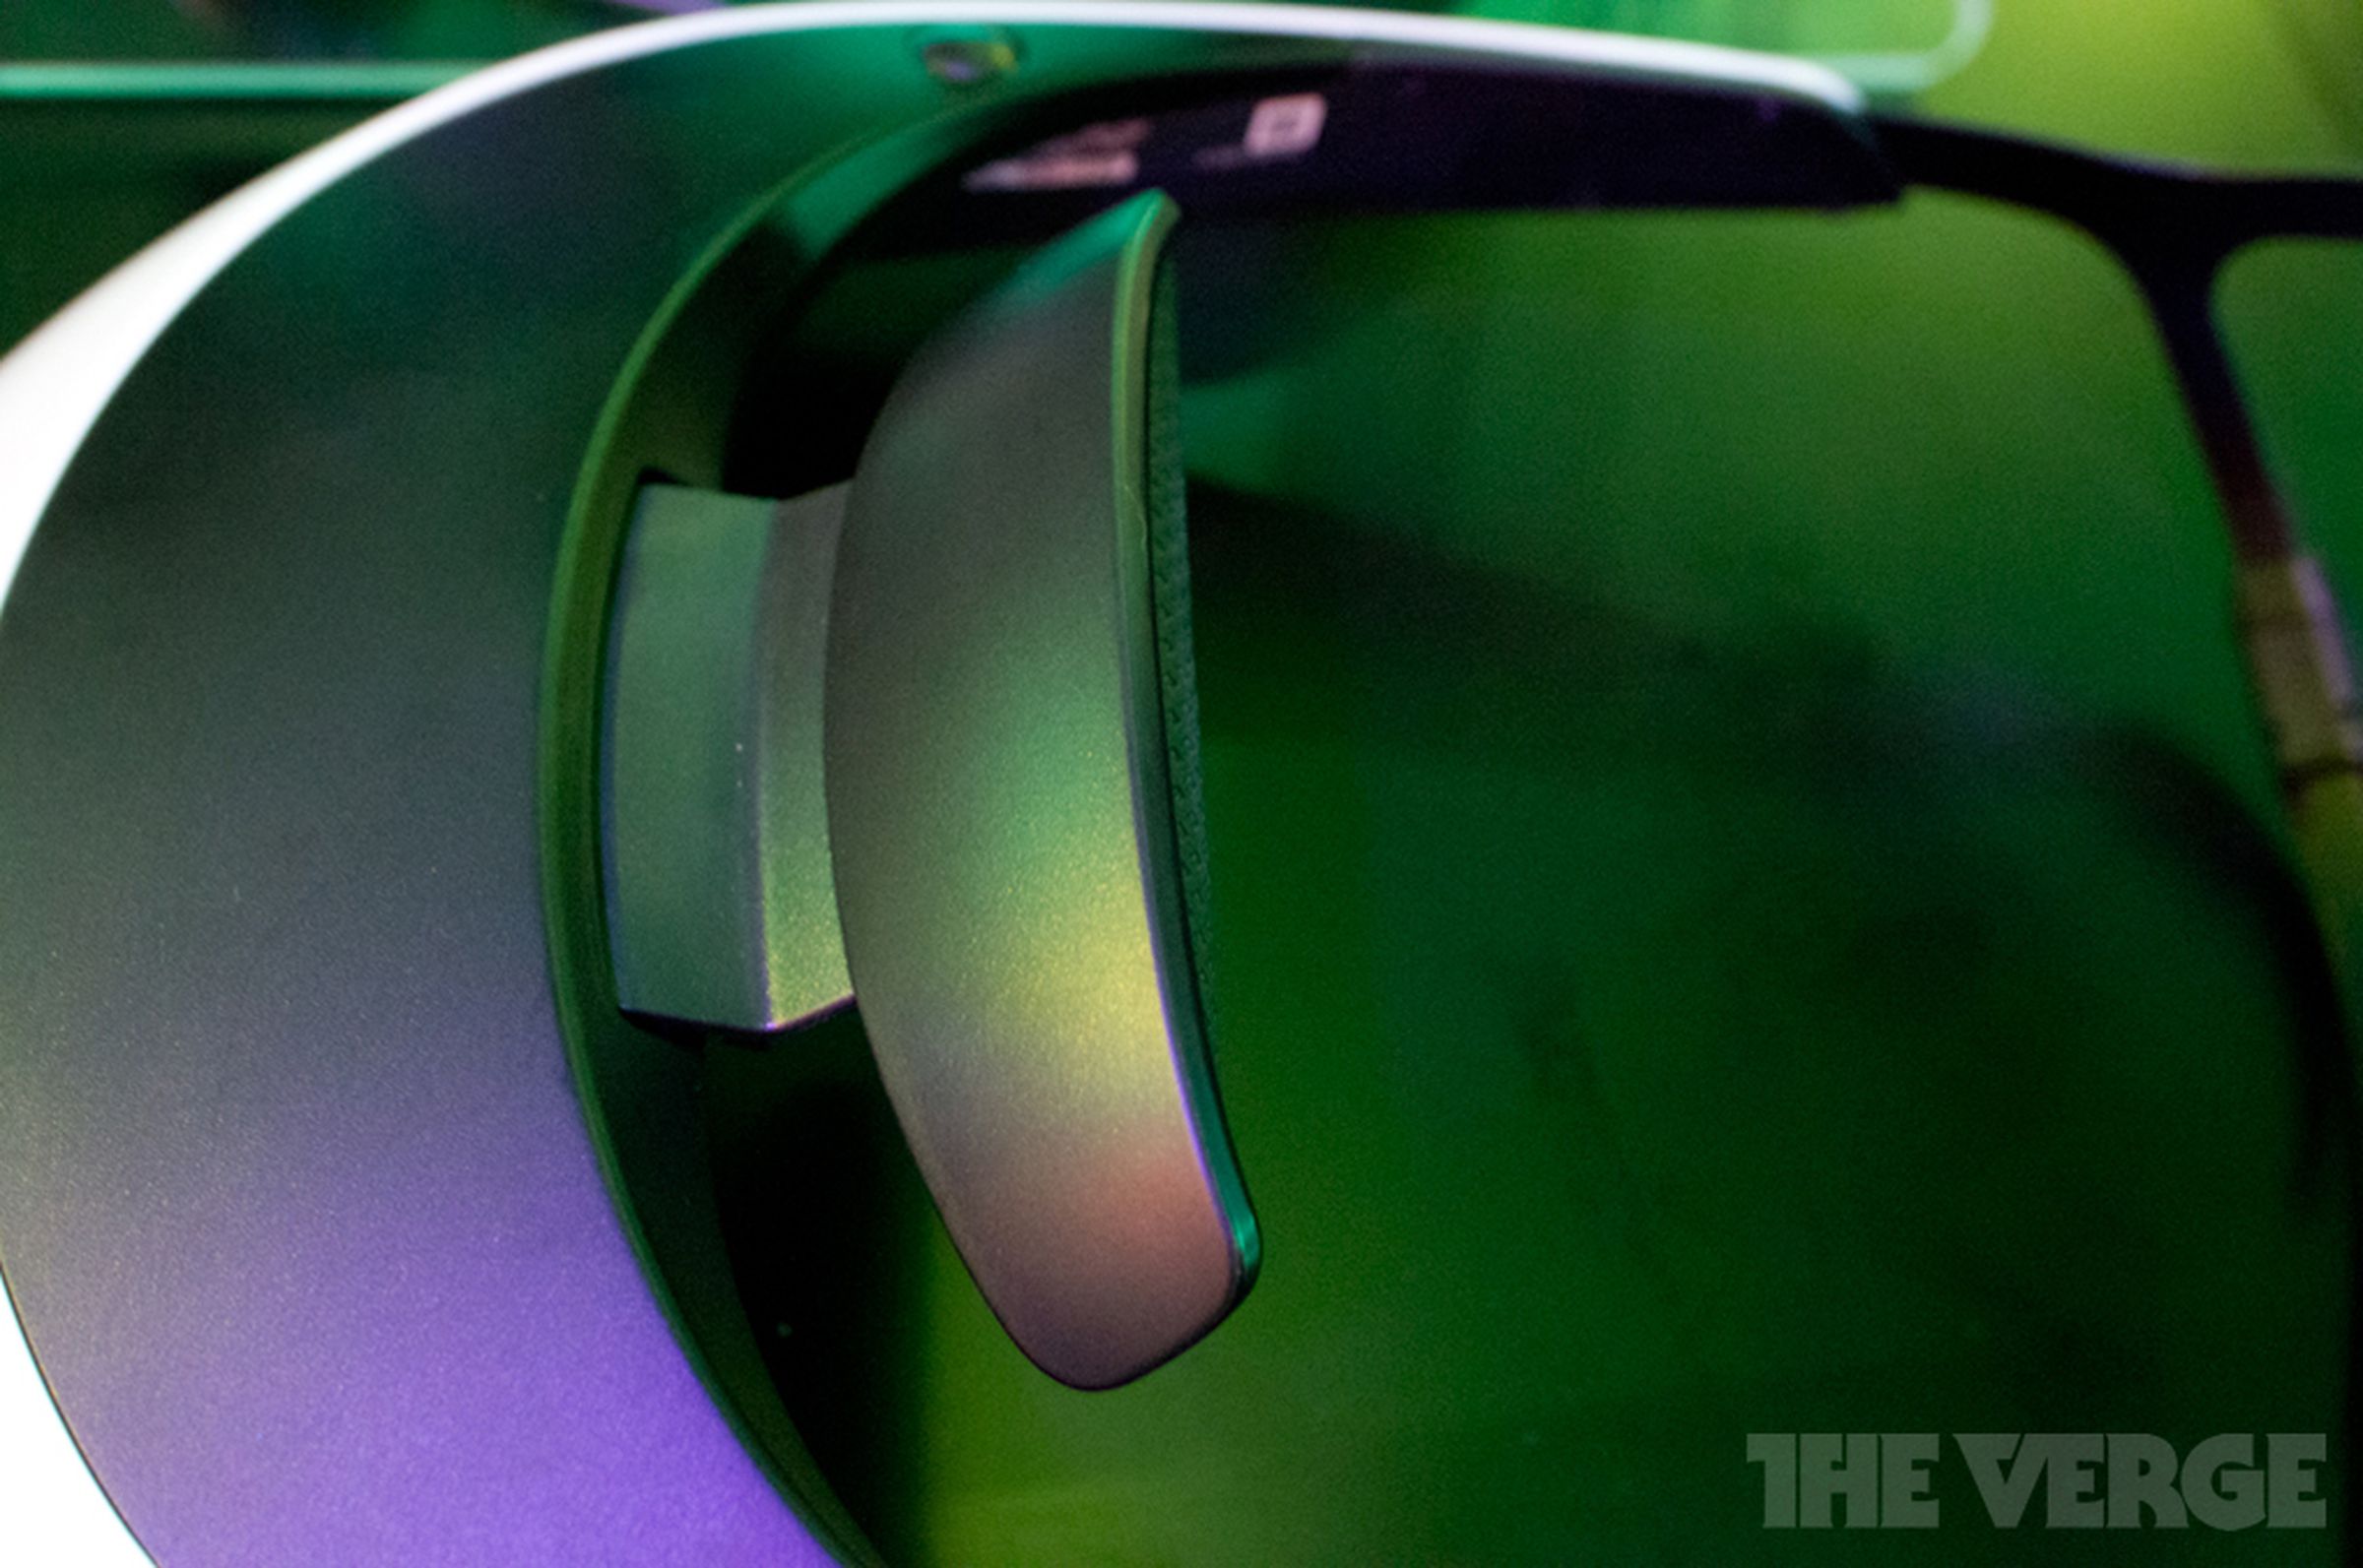 Sony HMZ-T2 personal 3D viewer hands-on photos